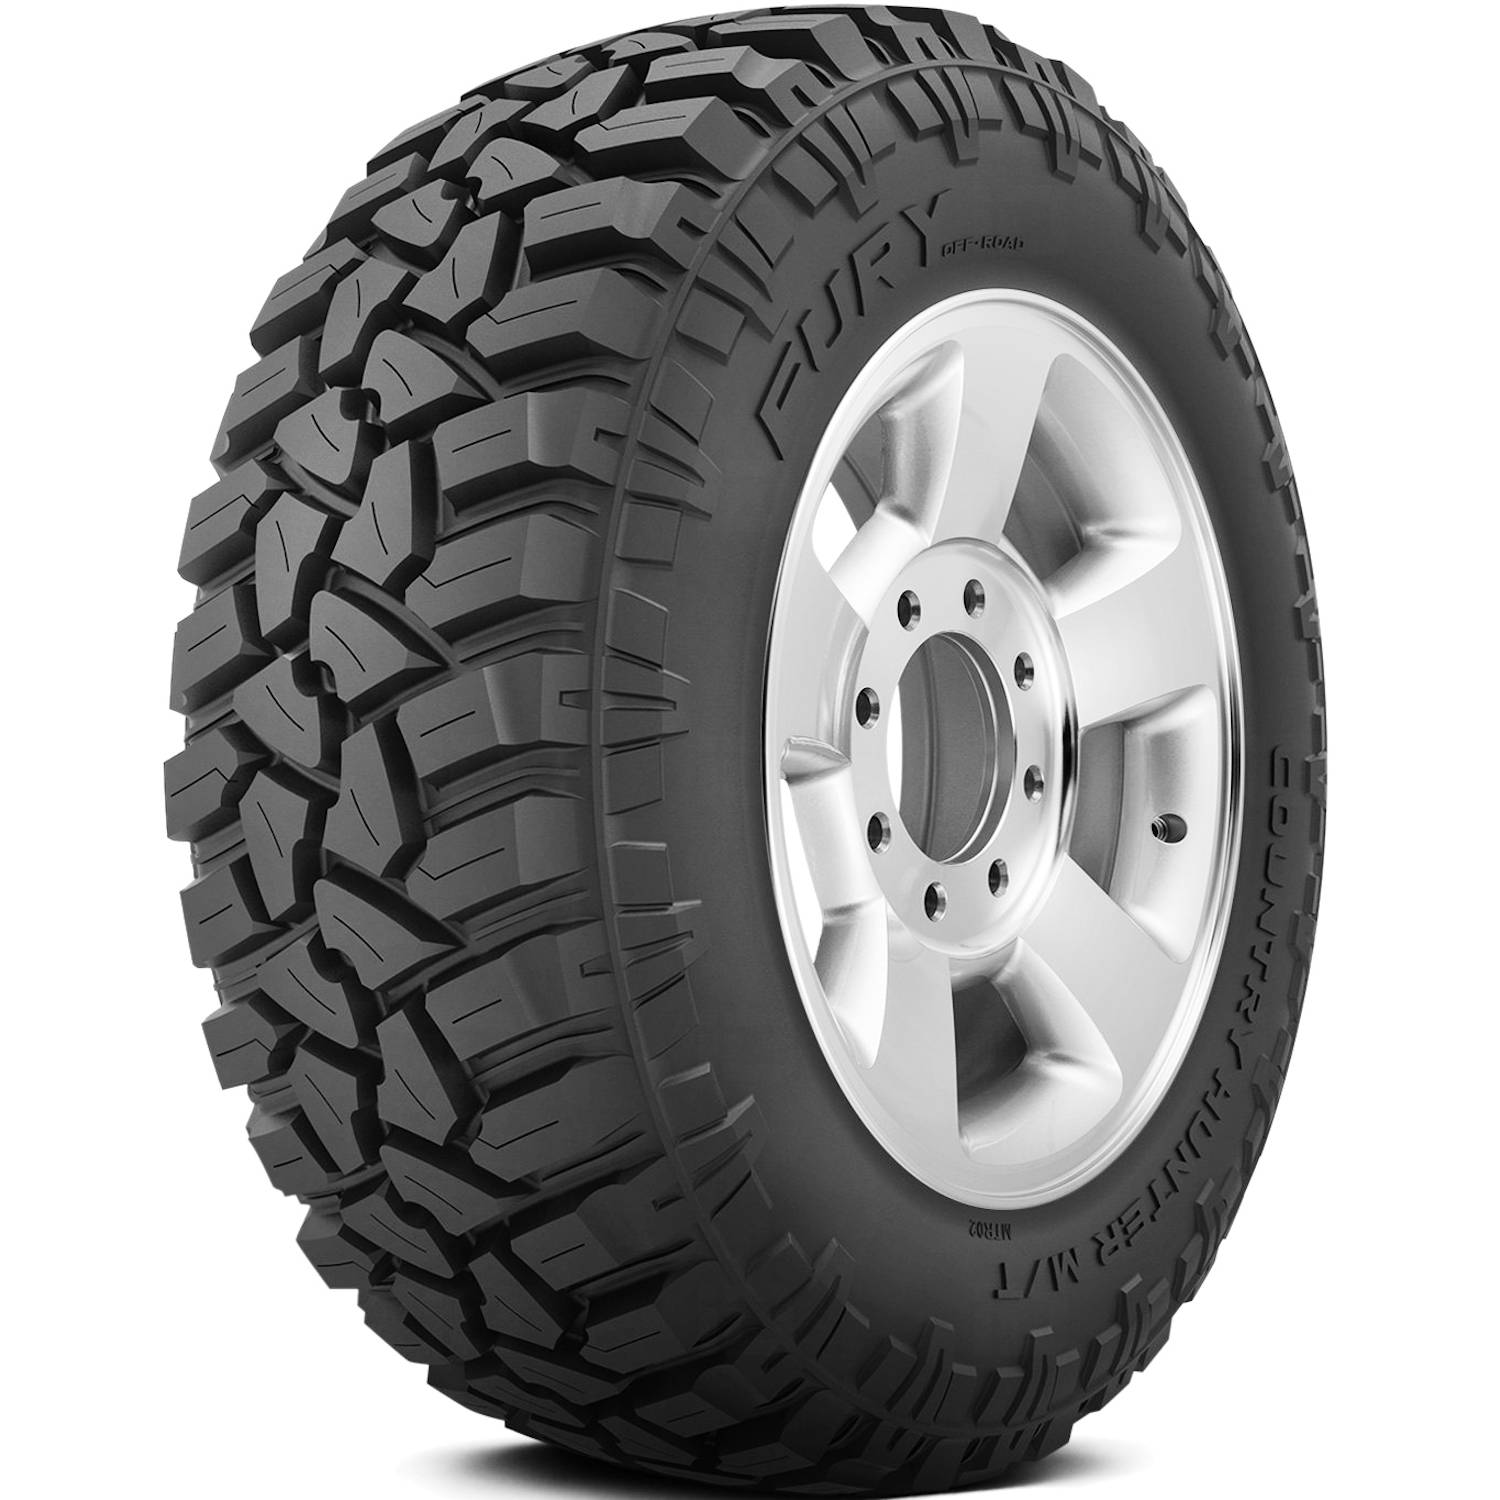 FURY OFFROAD COUNTRY HUNTER MTII 37X13.50R17LT Tires